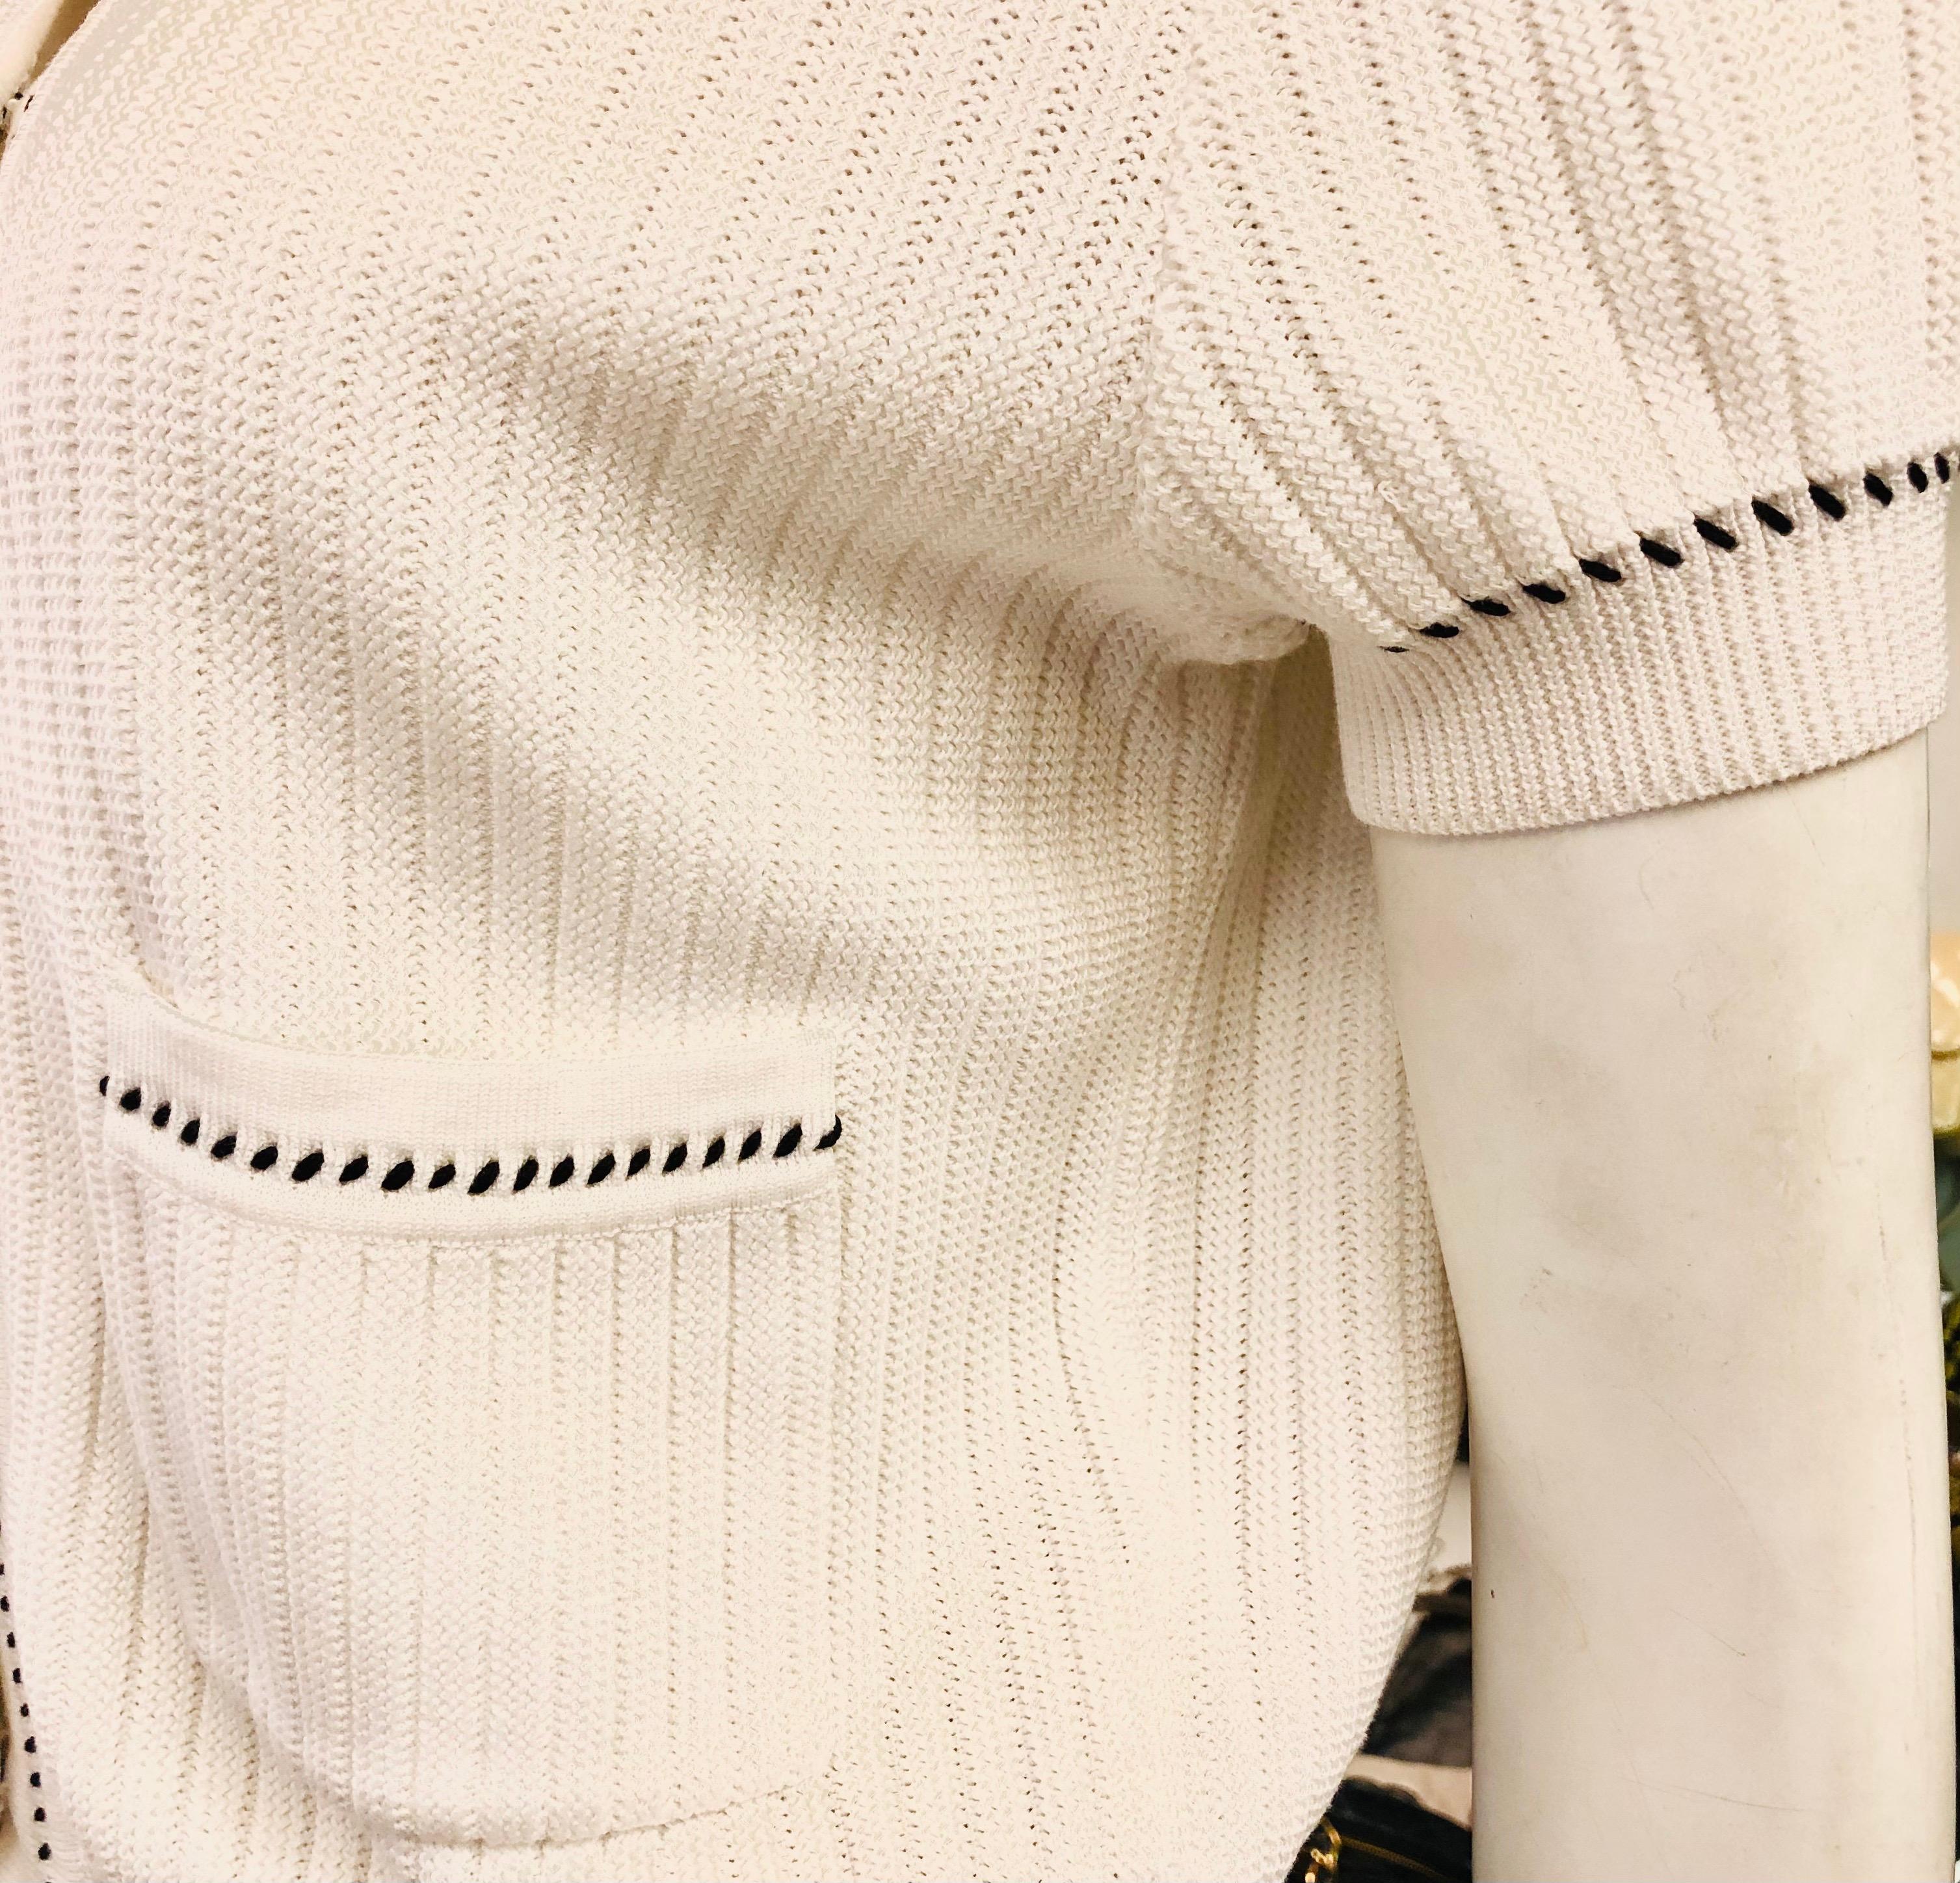 - Chanel white short sleeves knitted cotton cardigan from spring 1996 collection. 

- Black and white “CC” button closure. 

- Two front pockets. 

- Size 44.

- 100% cotton. 